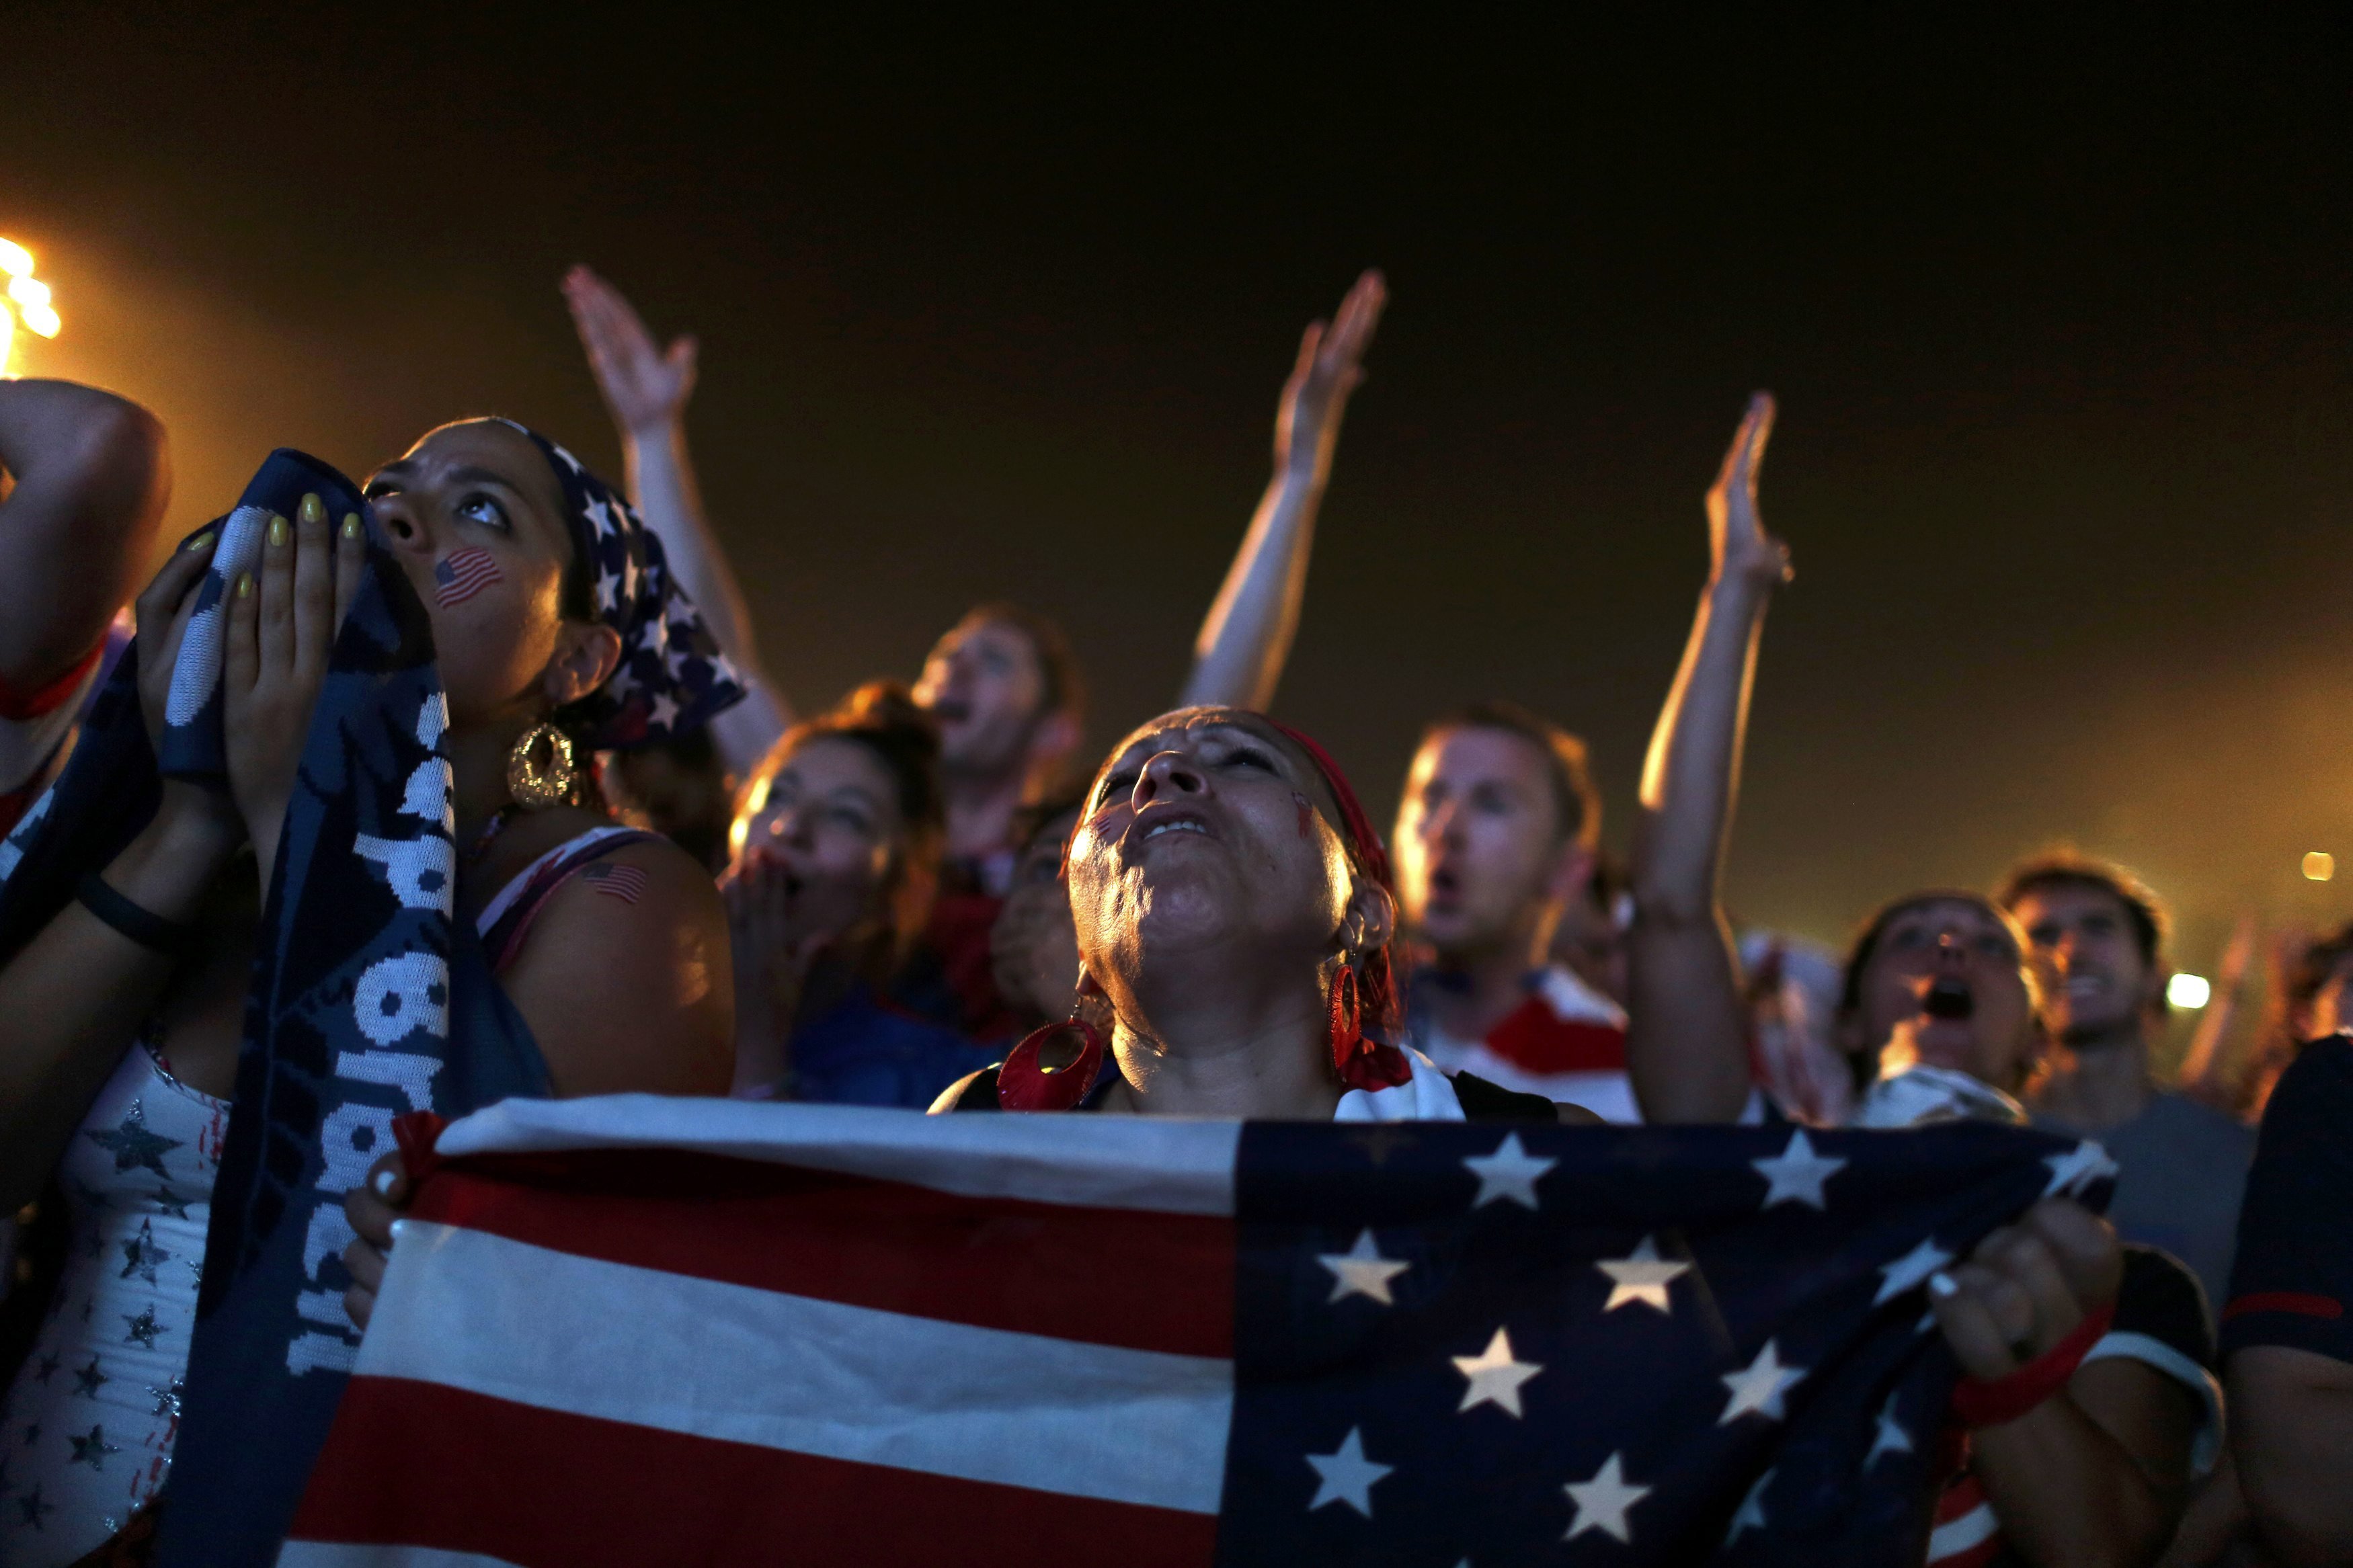 U.S. soccer fans react as they watch the 2014 World Cup soccer match between U.S. and Ghana on a large screen at Copacabana beach in Rio de Janeiro on June 16, 2014.